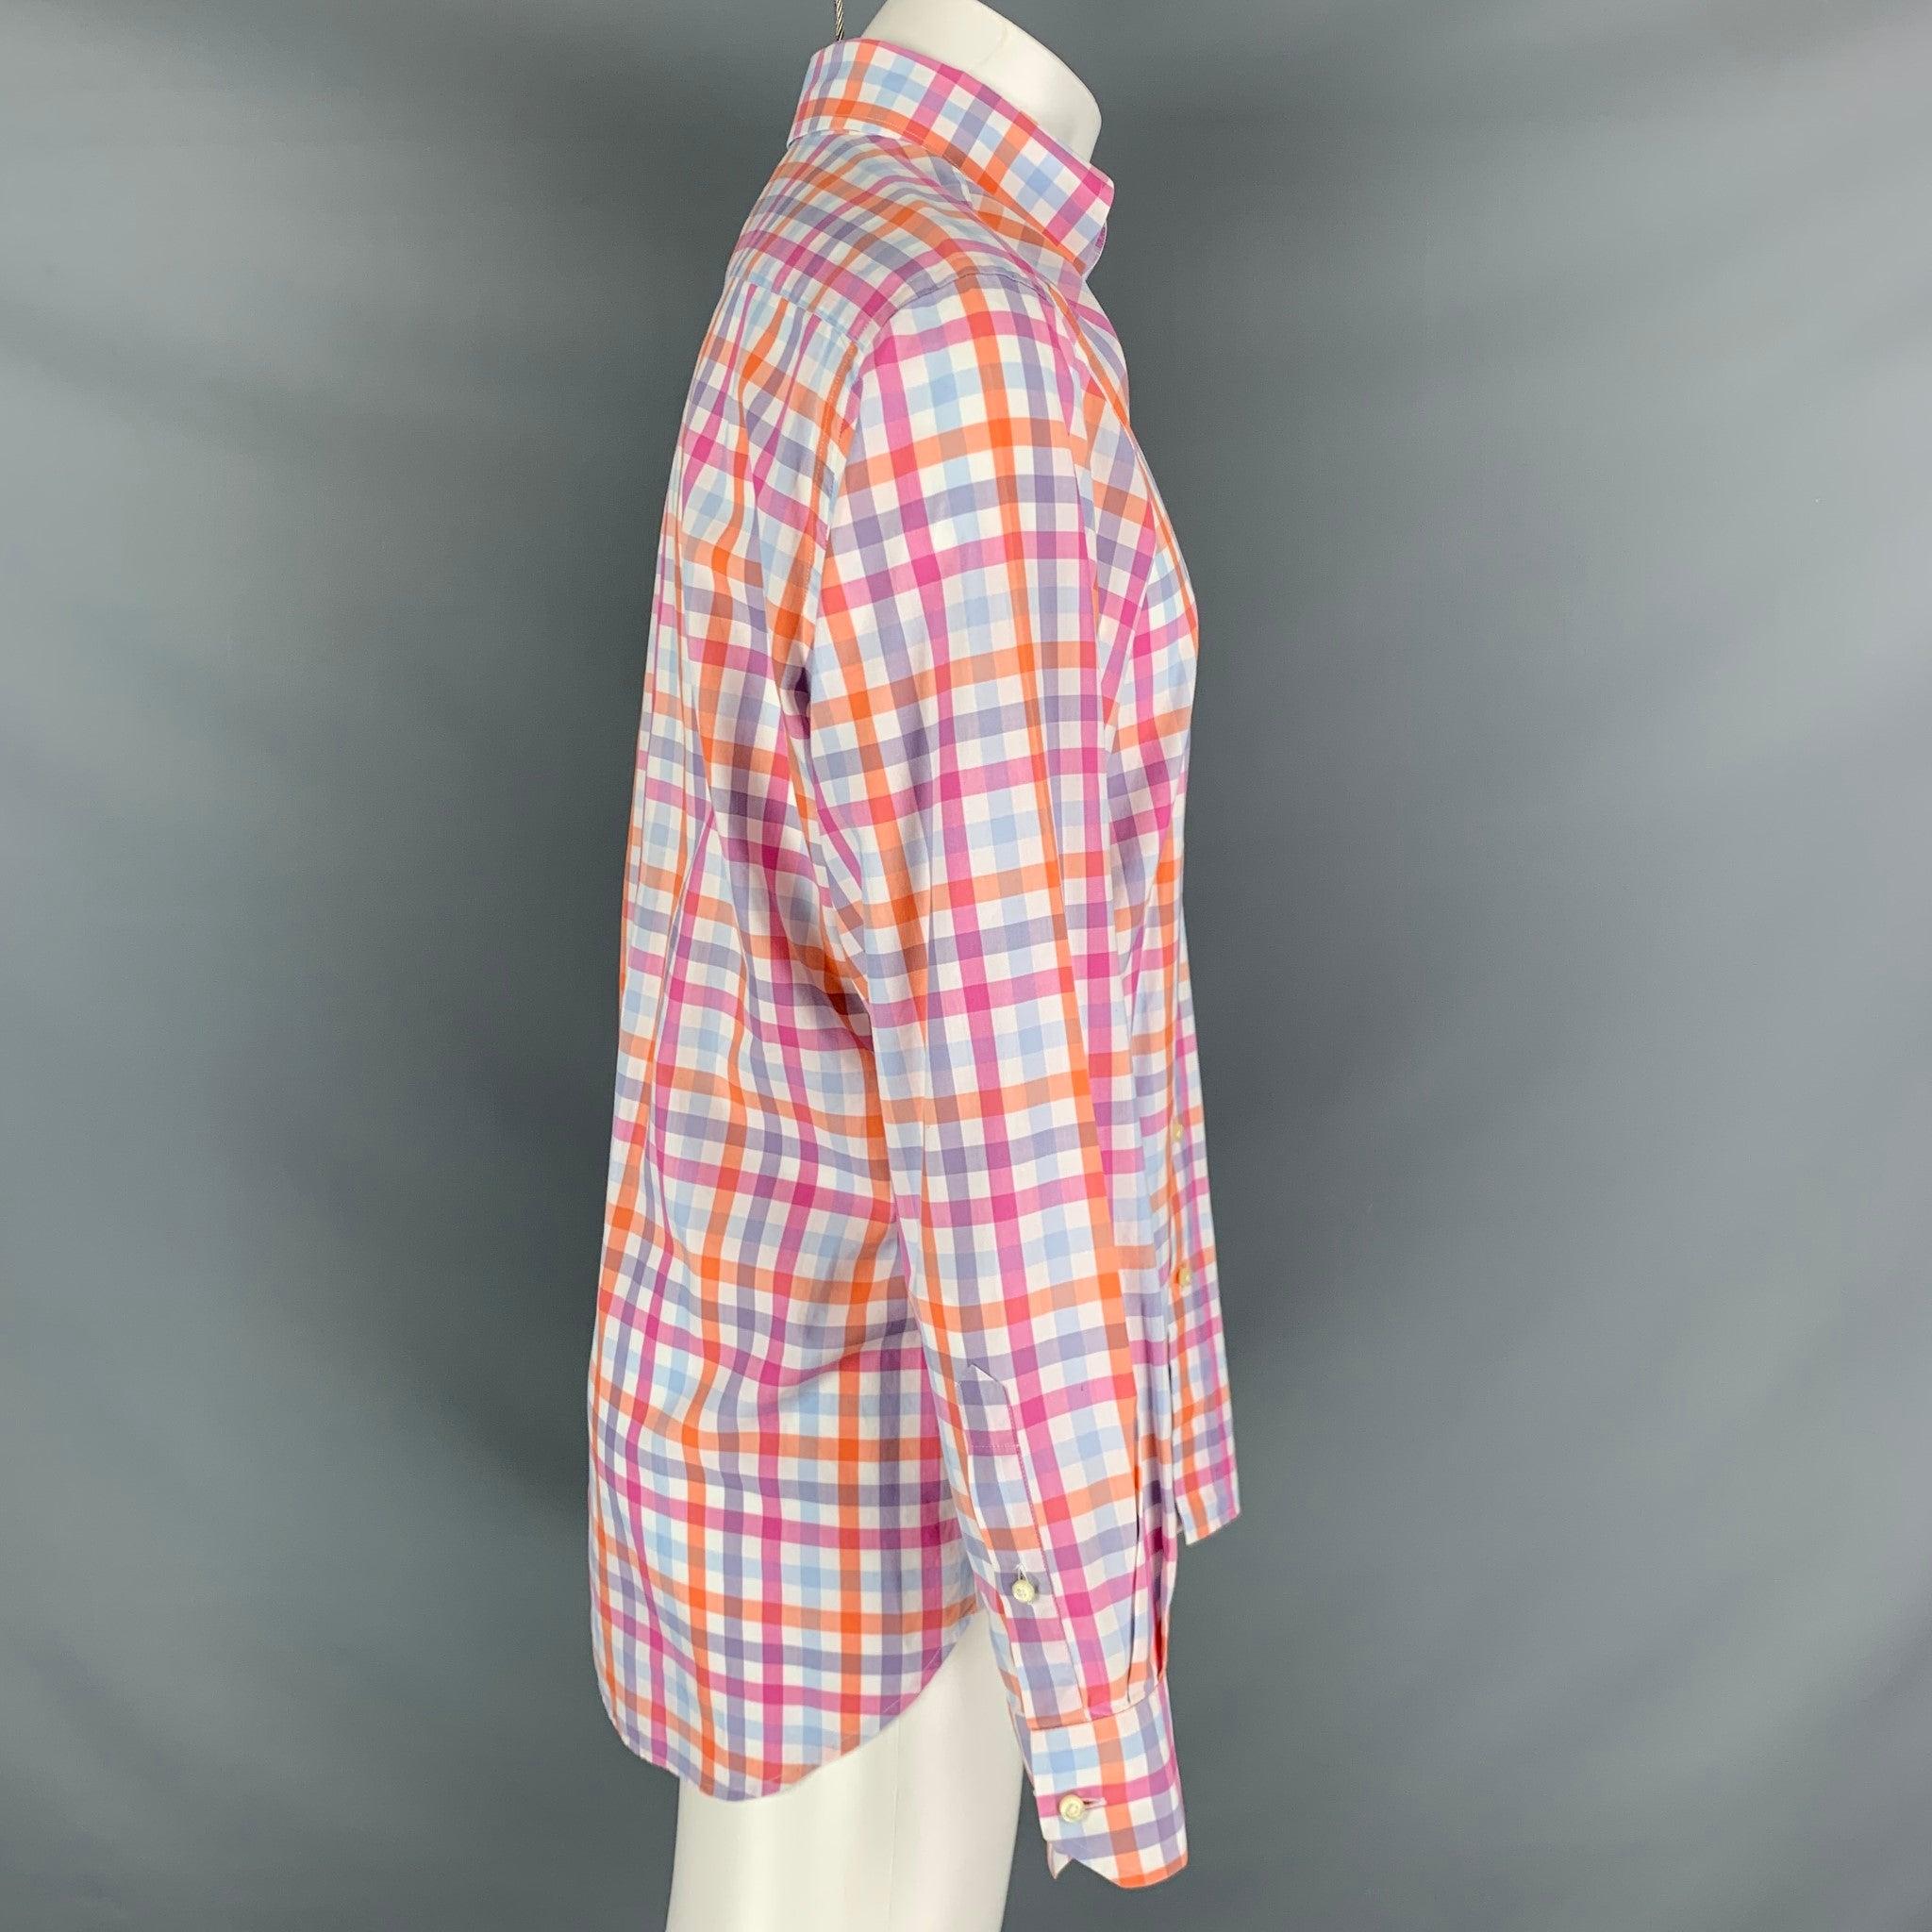 ETRO long sleeve shirt comes in an orange and white checkered cotton featuring a button down collar, embroidery logo, and a button up closure. Made in Italy. Very Good Pre-Owned Condition. 

Marked:   40 

Measurements: 
 
Shoulder: 18.5 inches